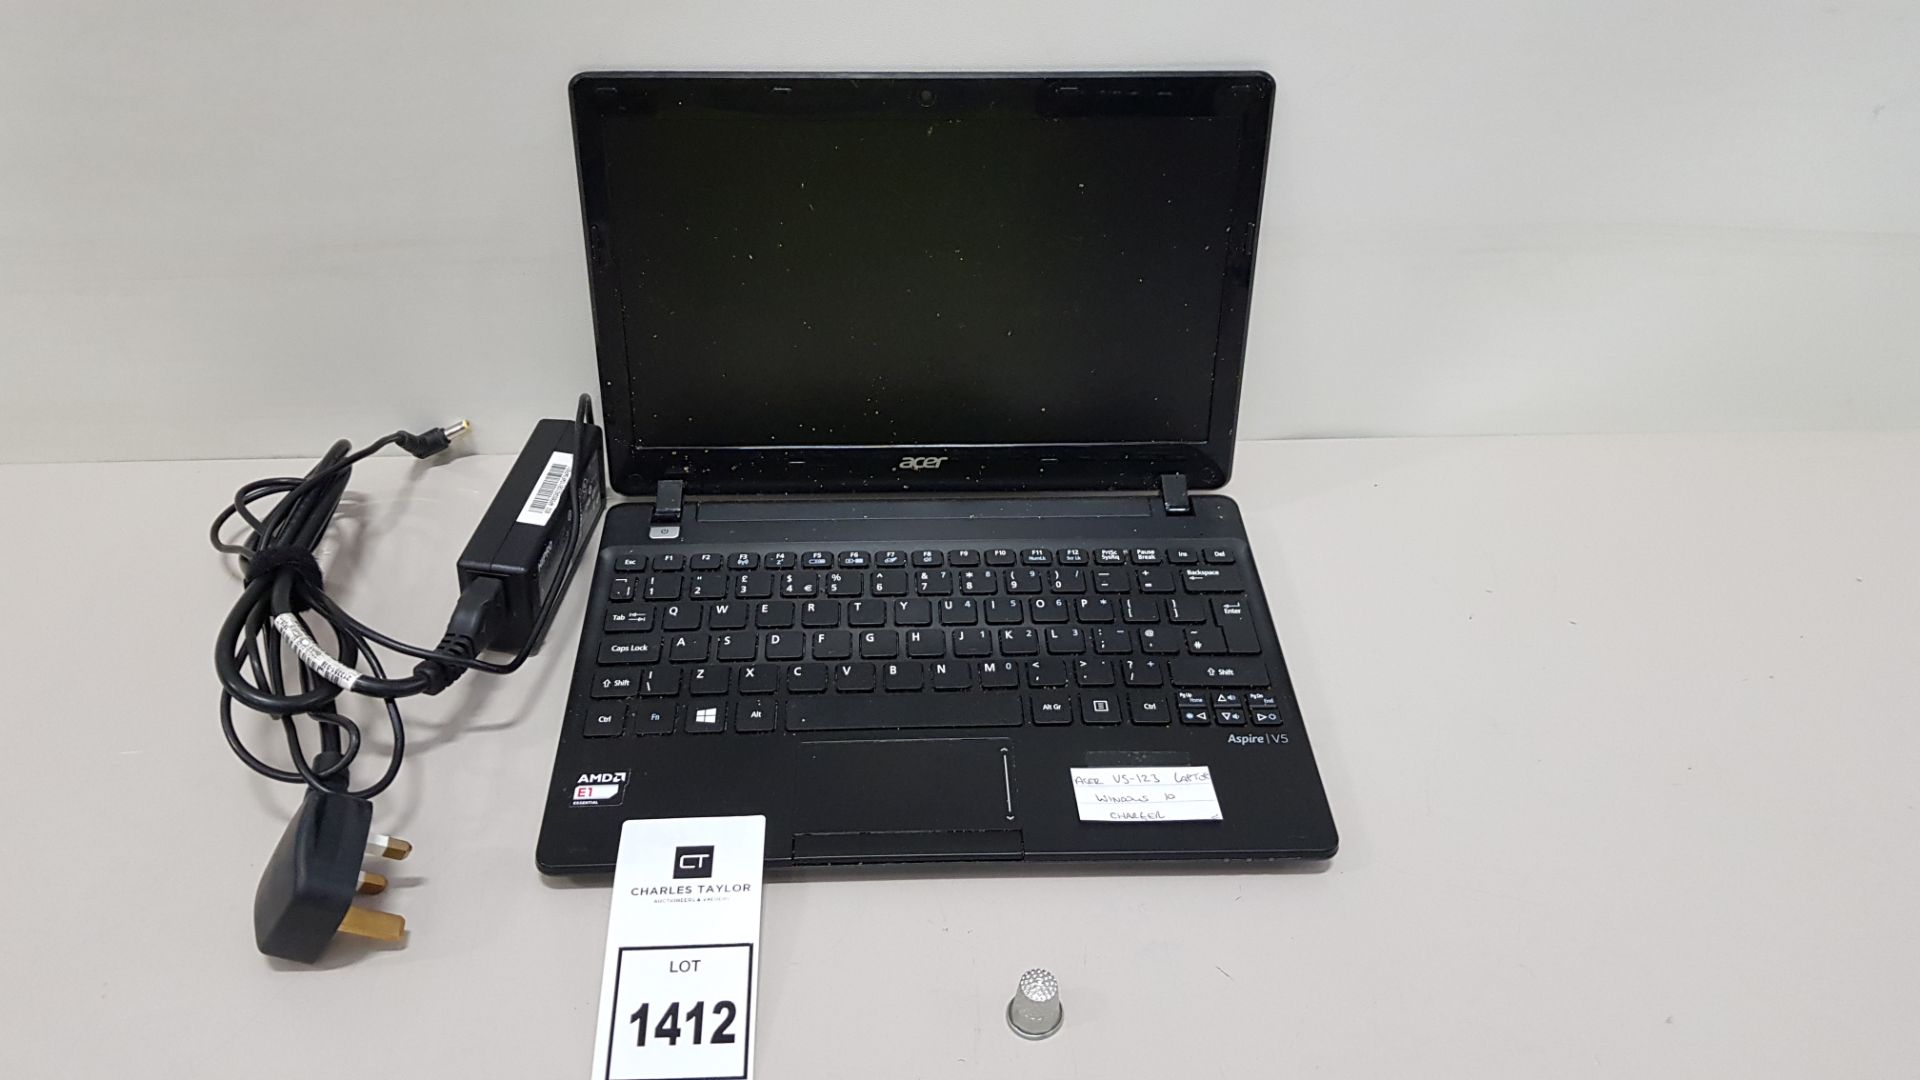 ACER V5-123 LAPTOP WINDOWS 10 - WITH CHARGER